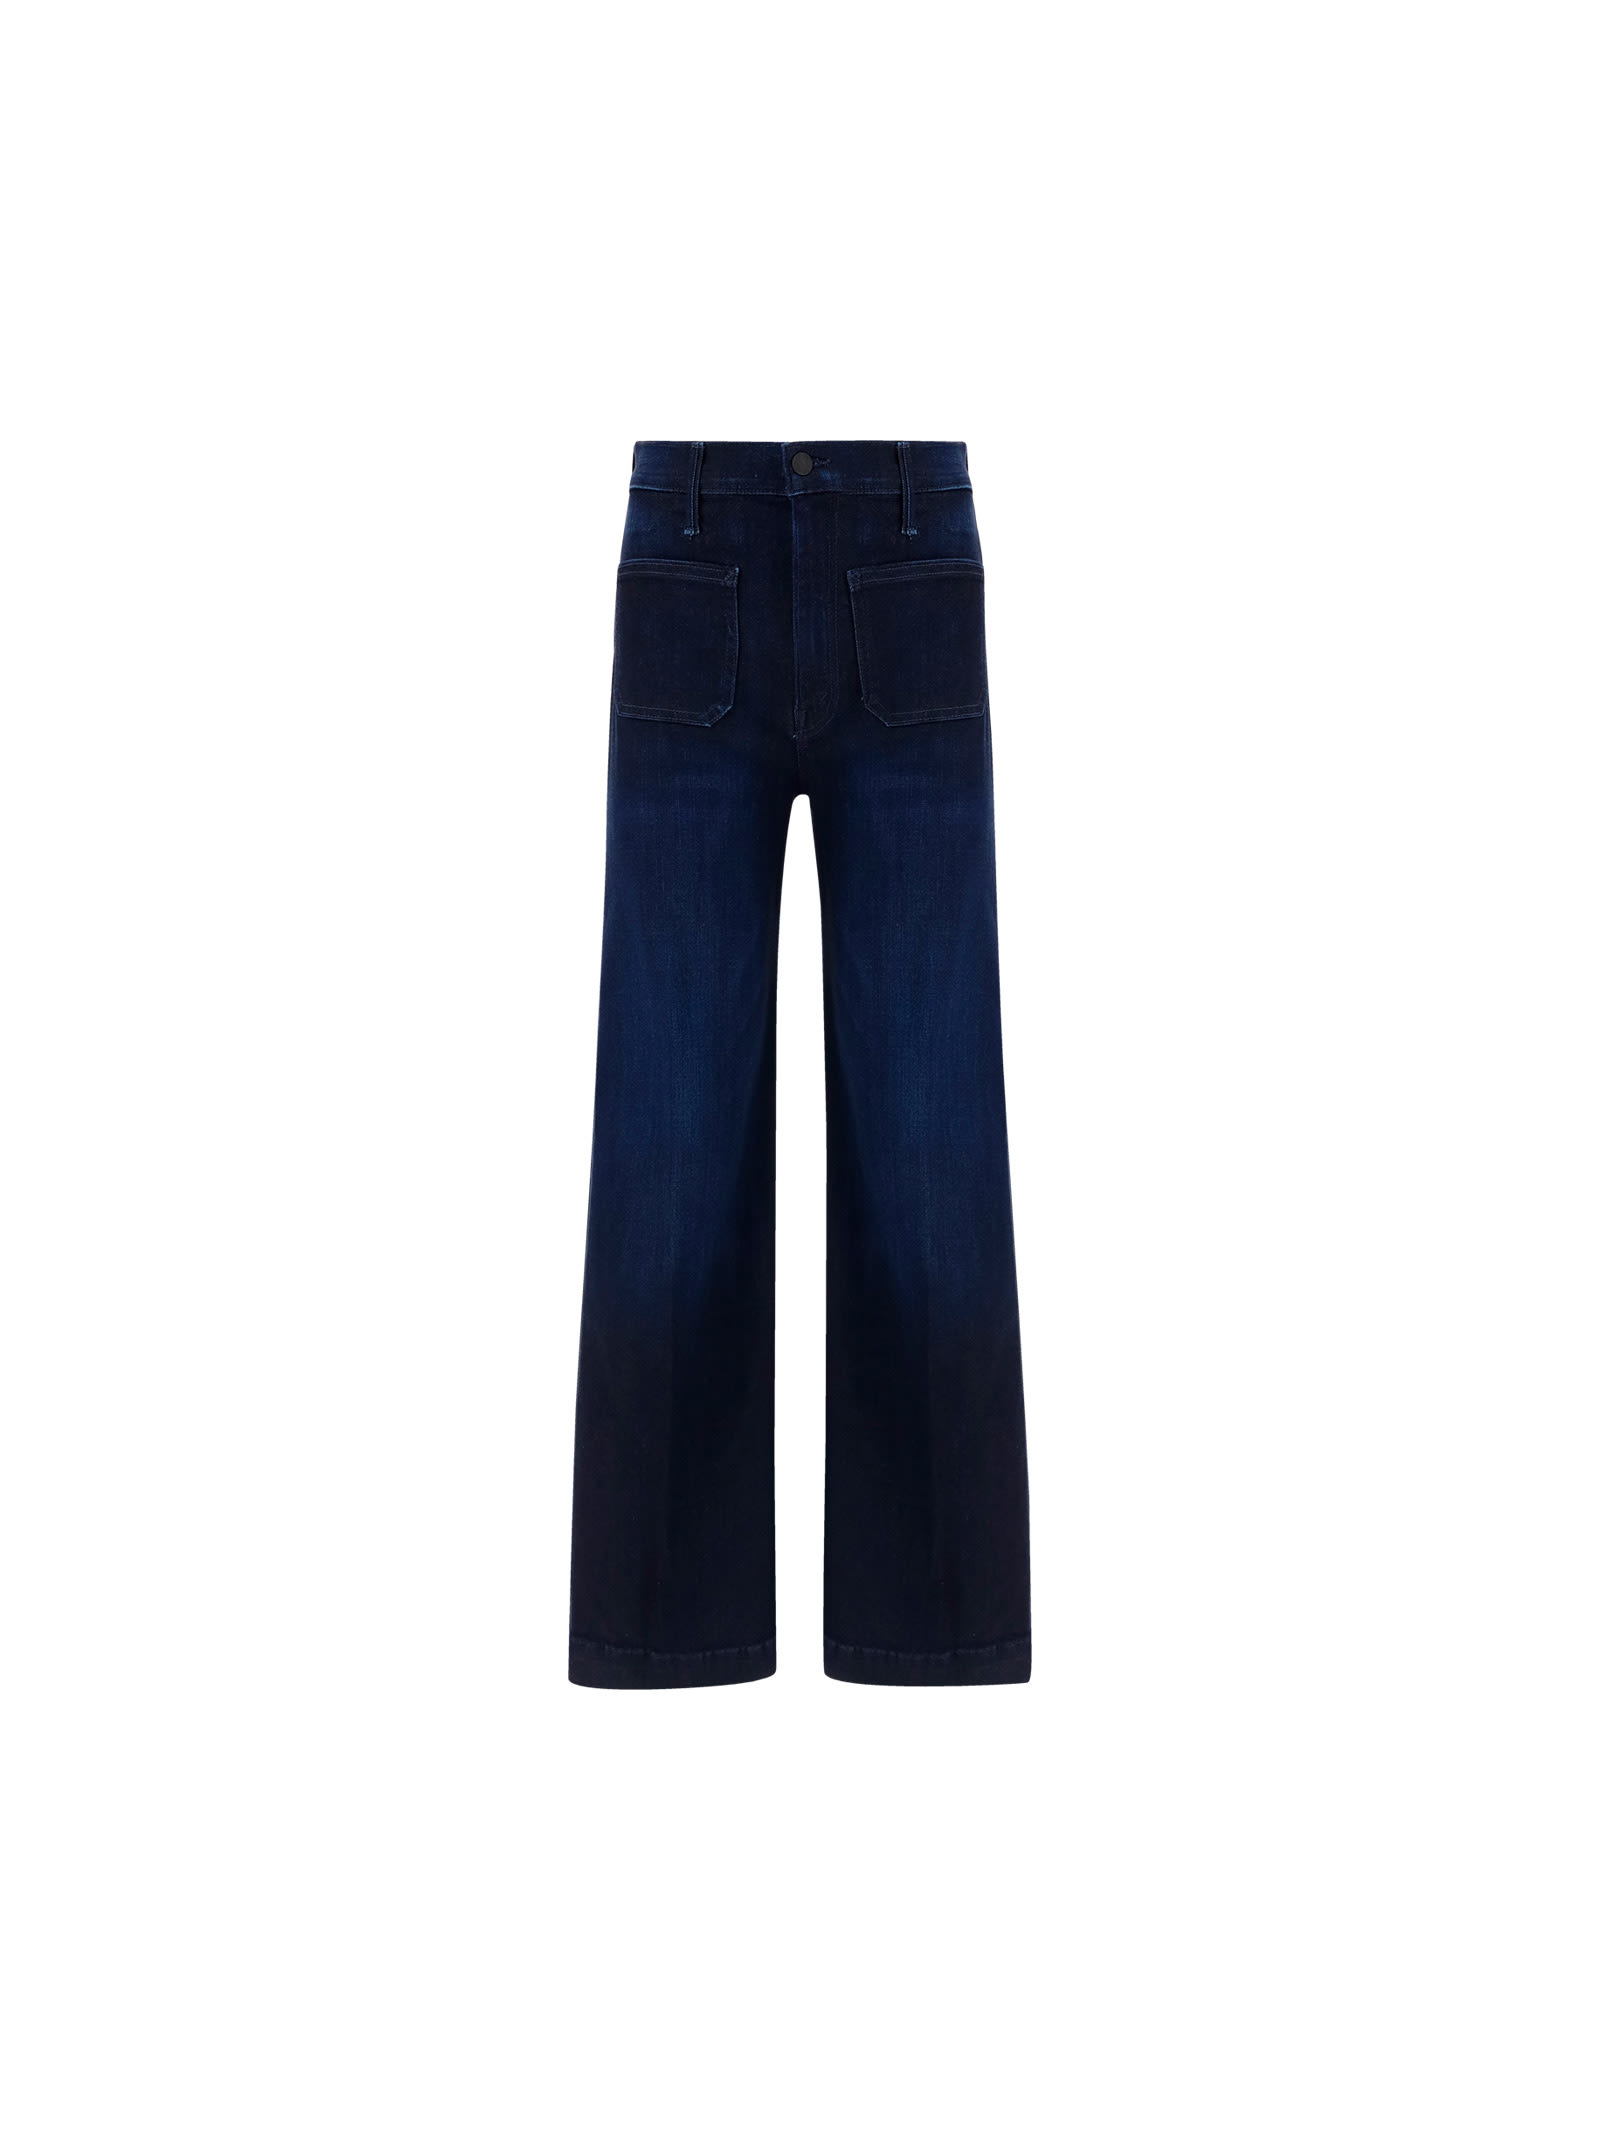 Mother Denim The Swooner Patch Jeans